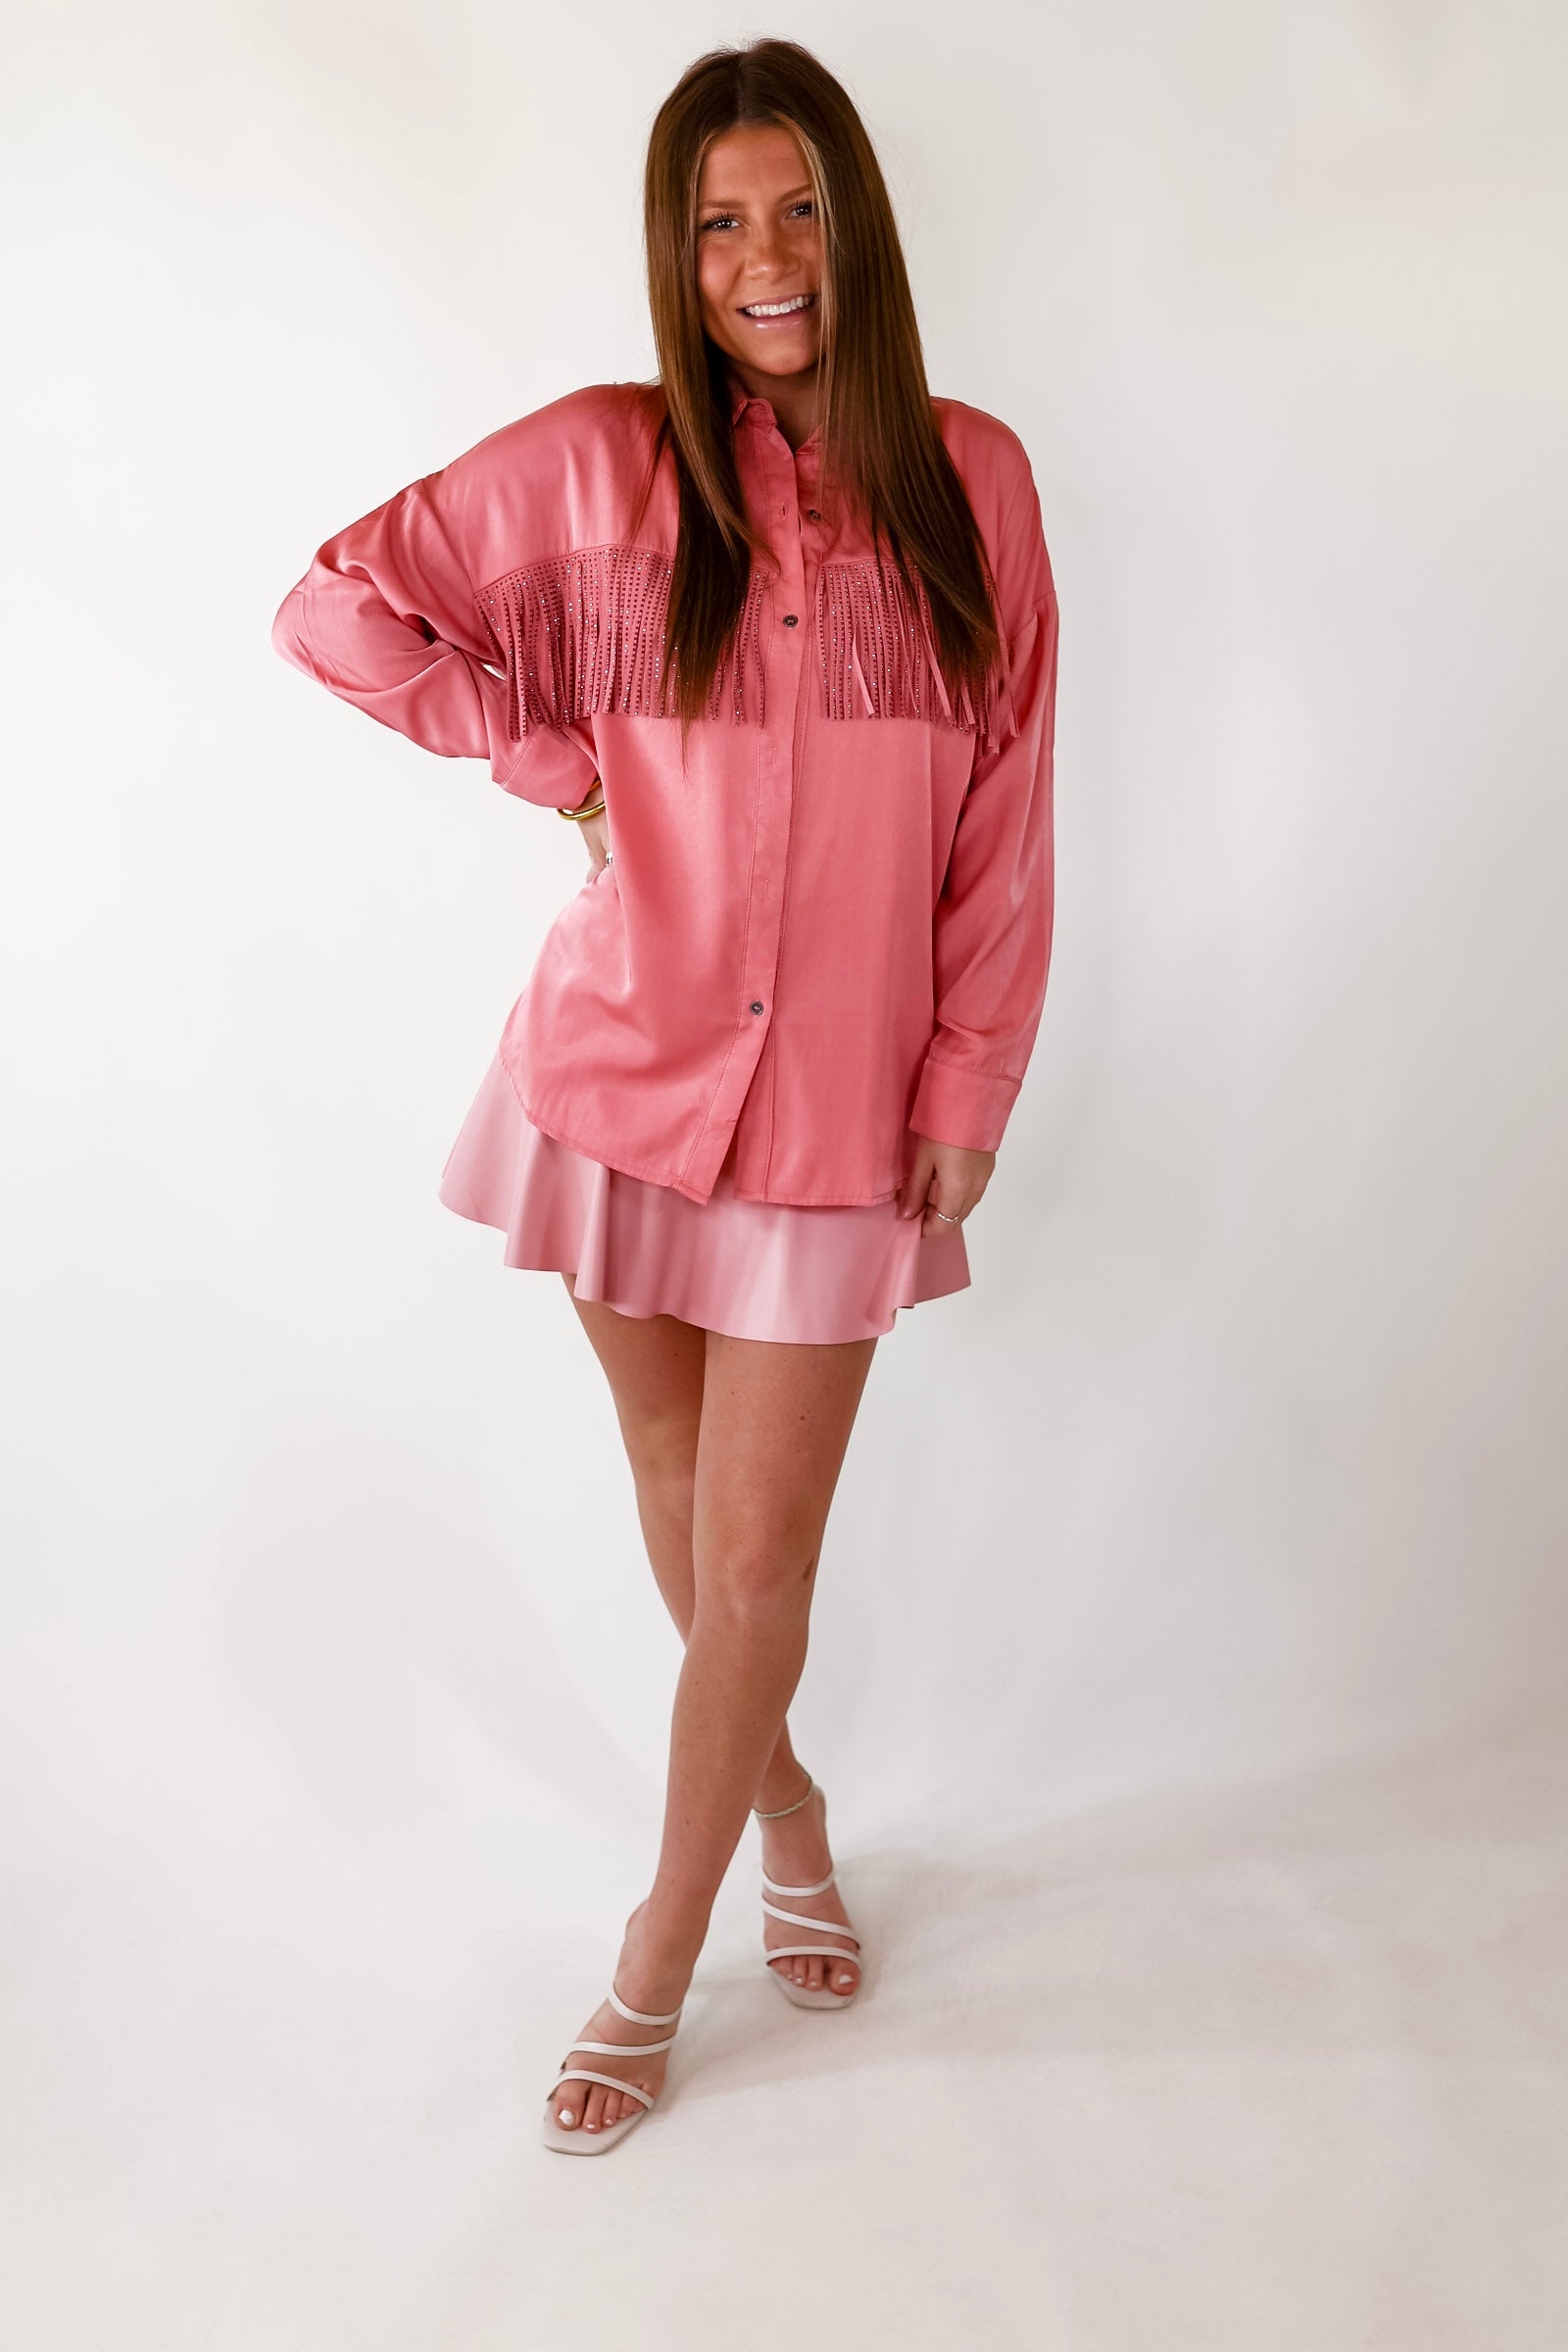 All That Shimmers Crystal Fringe Button Up Top with Long Sleeves in Coral Pink - Giddy Up Glamour Boutique